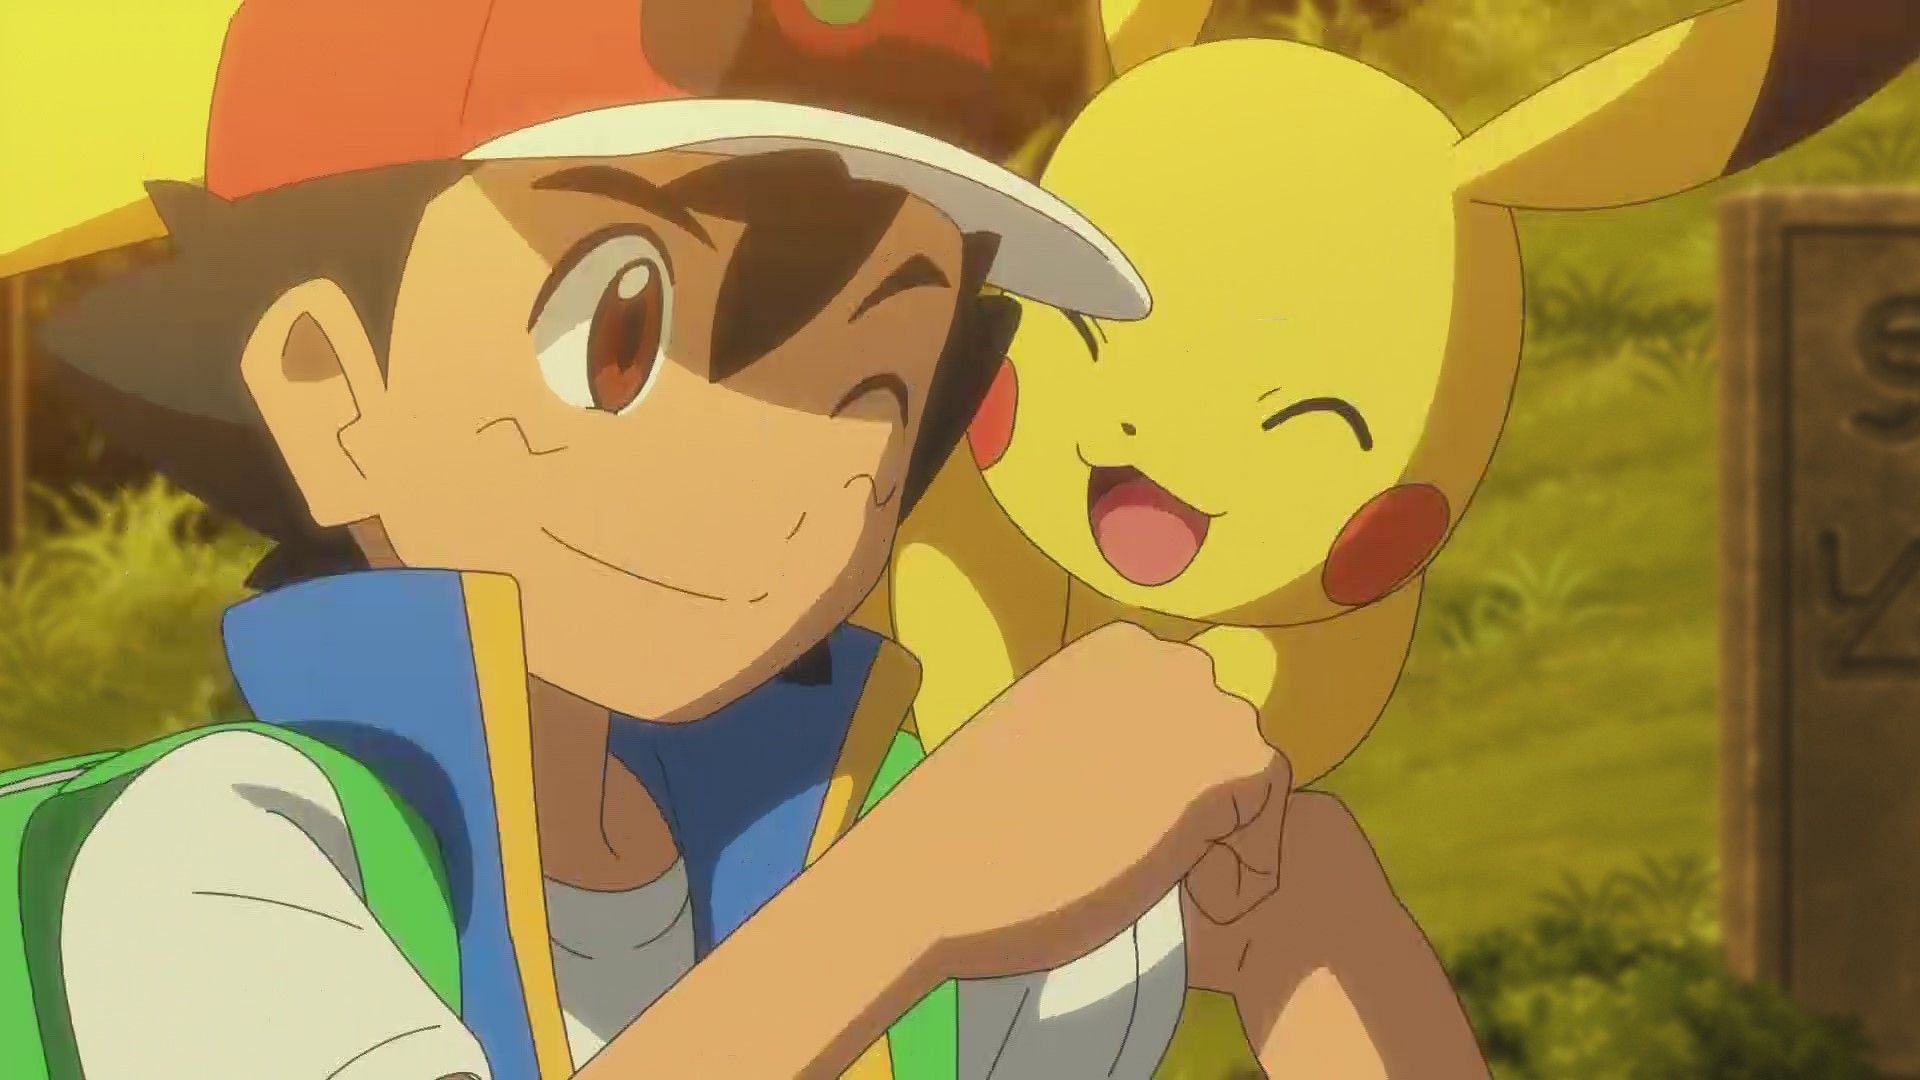 The end of an era: Ash and Pikachu's journey ends after 26 years